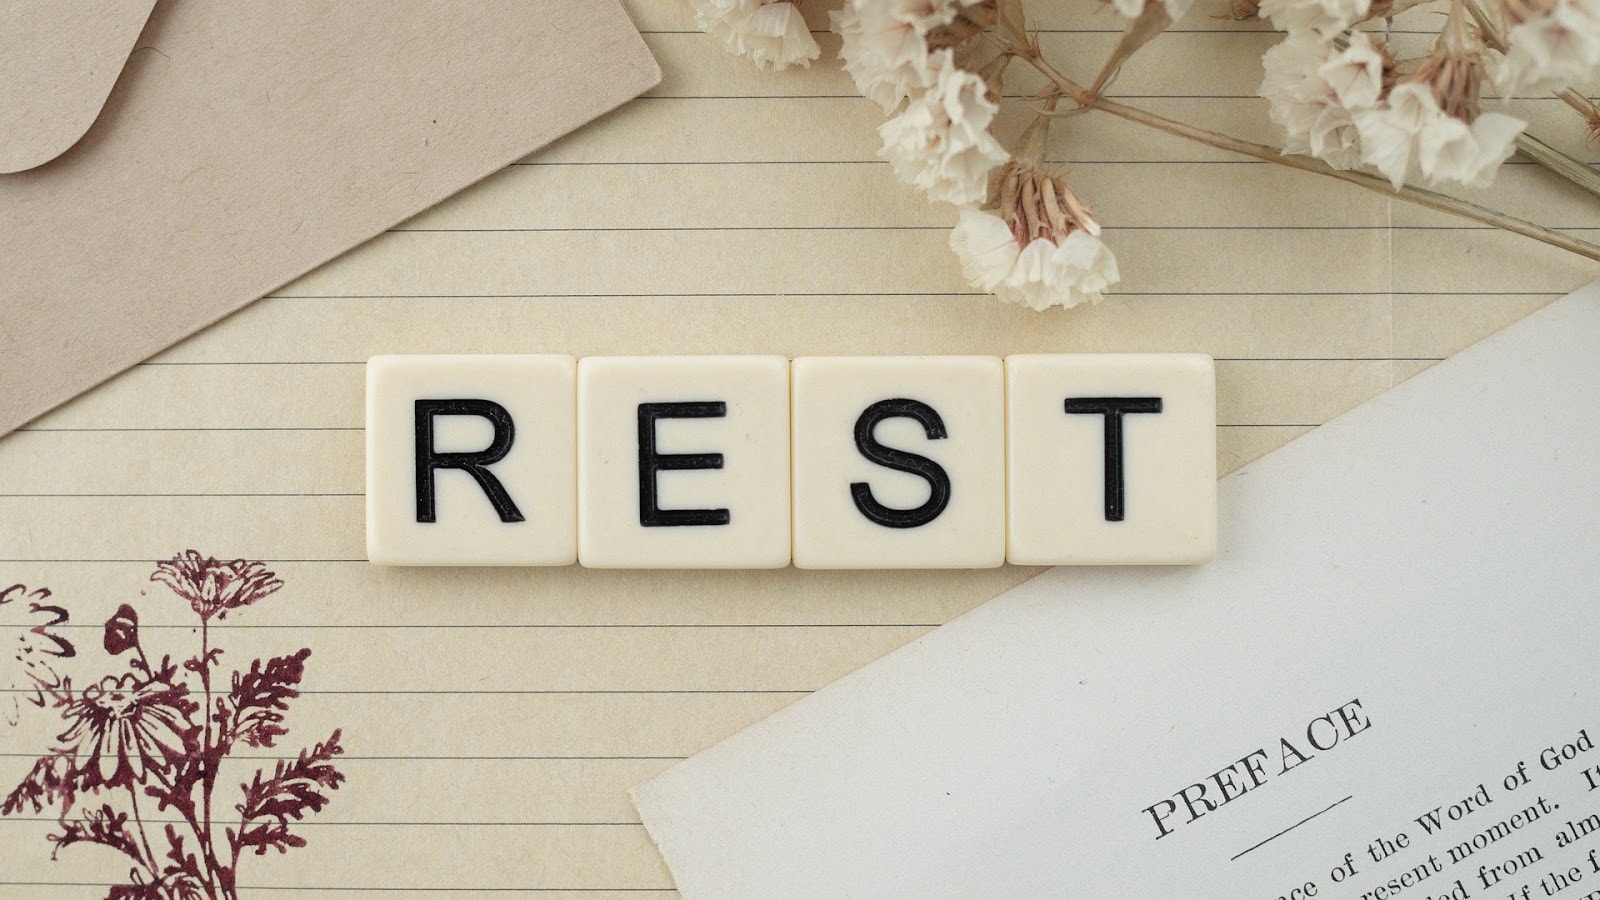 rest spelled out in scrabble tiles